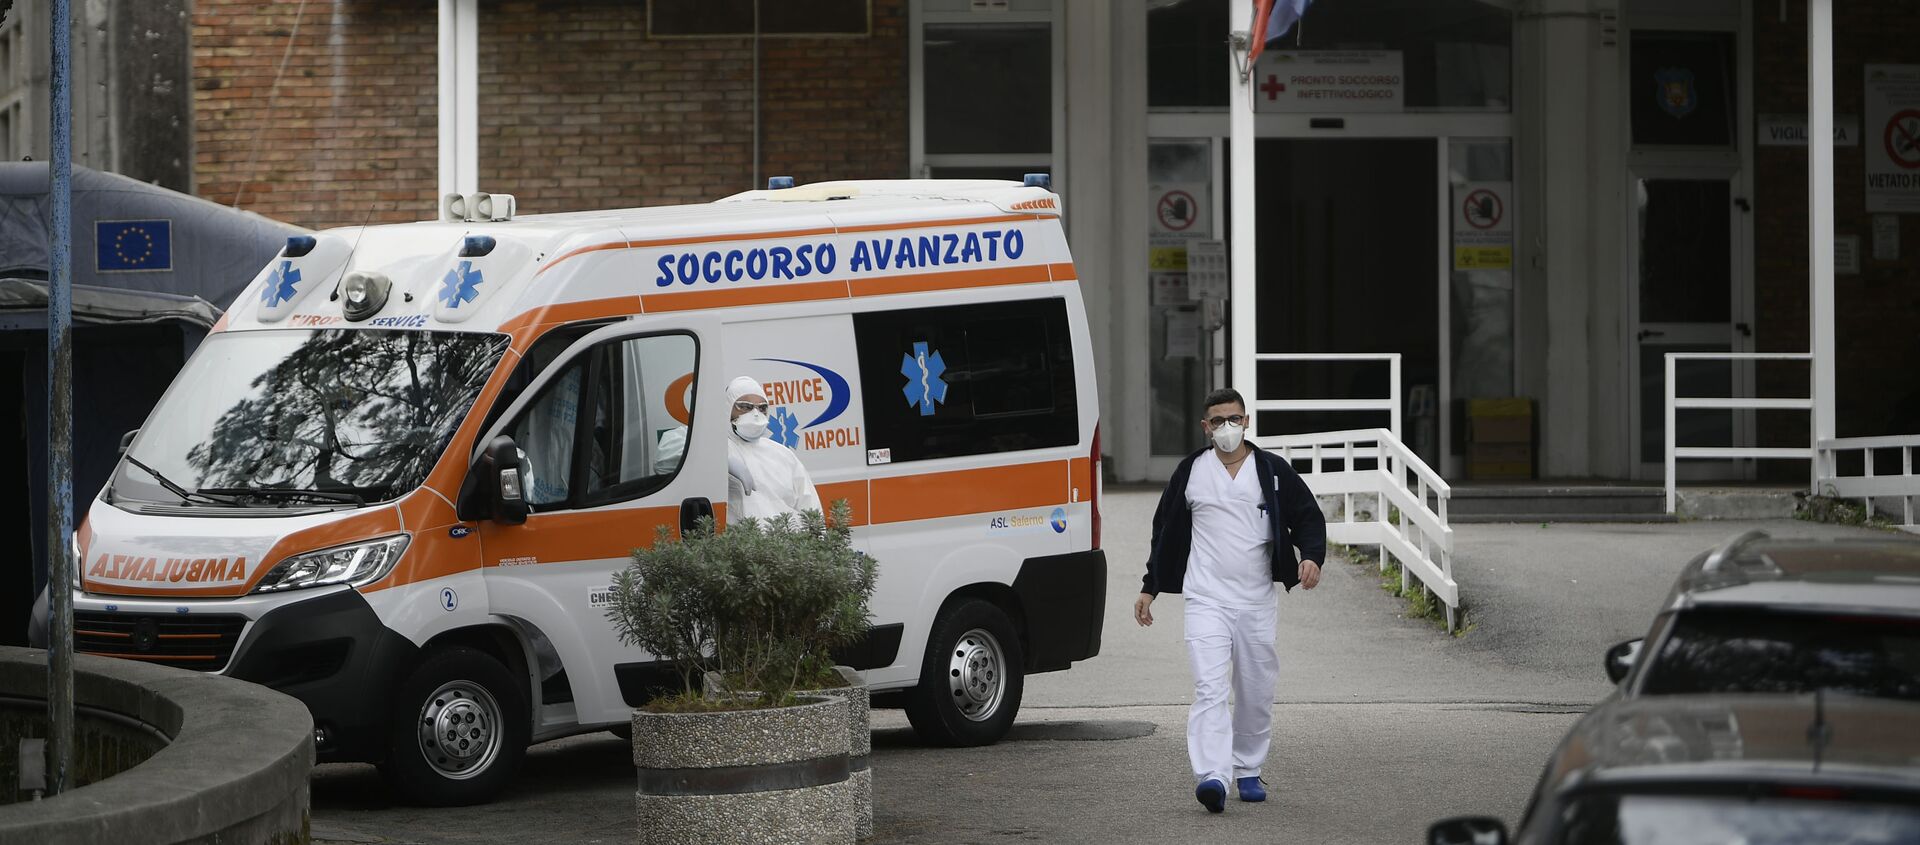 An ambulance is parked outside the entrance to the infectious diseases emergency unit at the Cotugno hospital in Naples on November 12, 2020 amid a surge of COVID-19 cases in Naples overwhelming hospitals. - Sputnik International, 1920, 04.02.2021